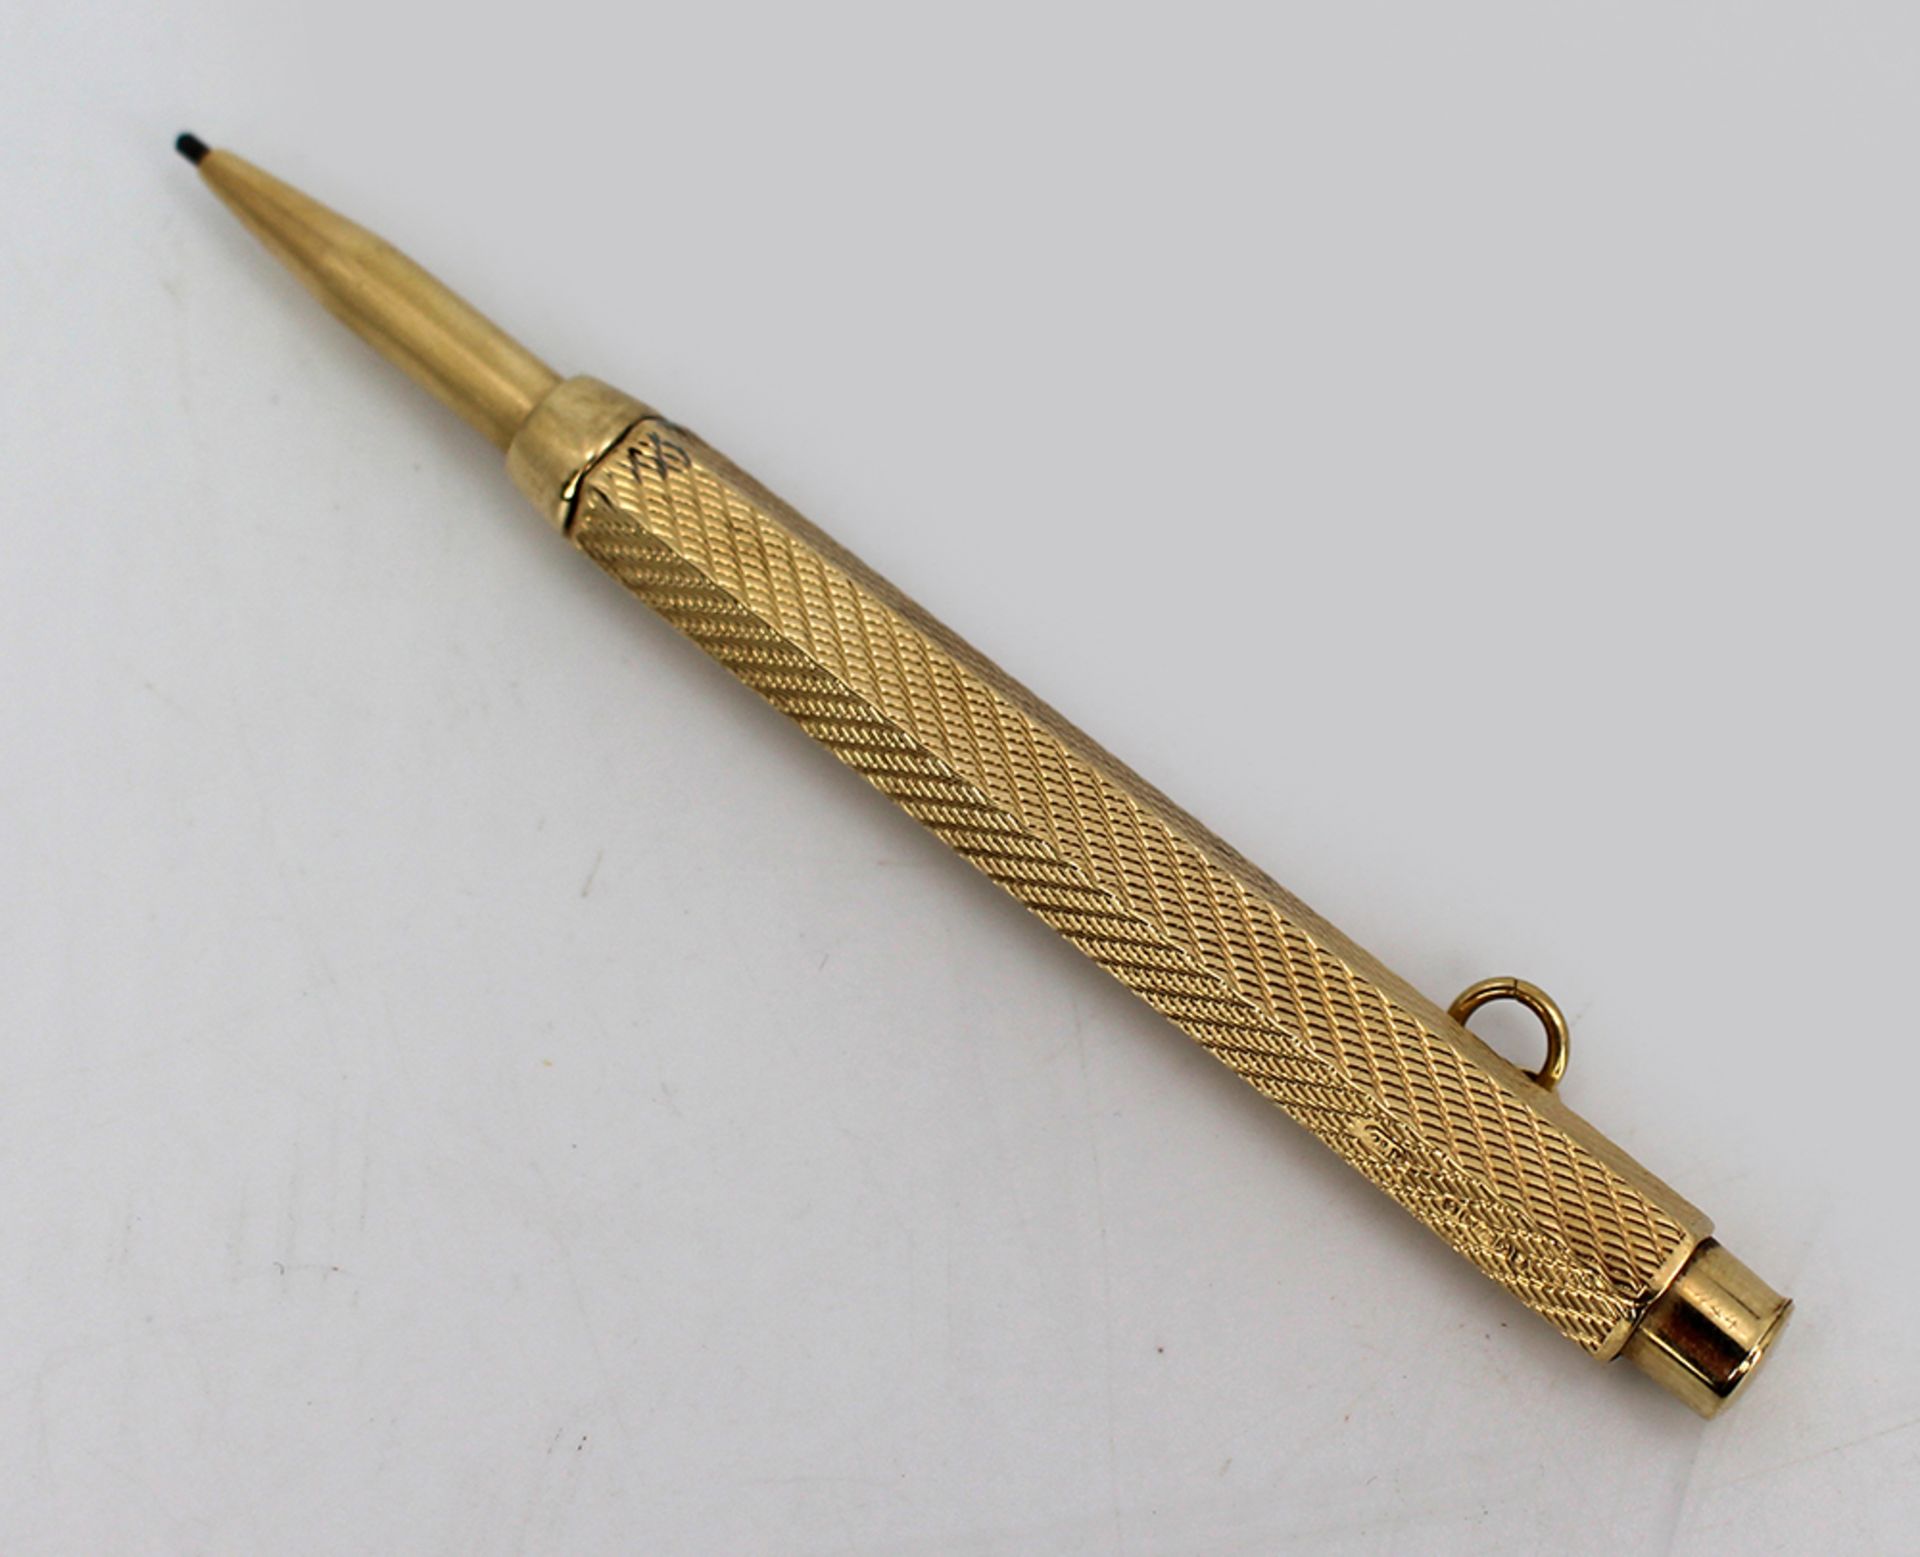 Vintage 9ct Gold Propelling Pencil - Image 3 of 3